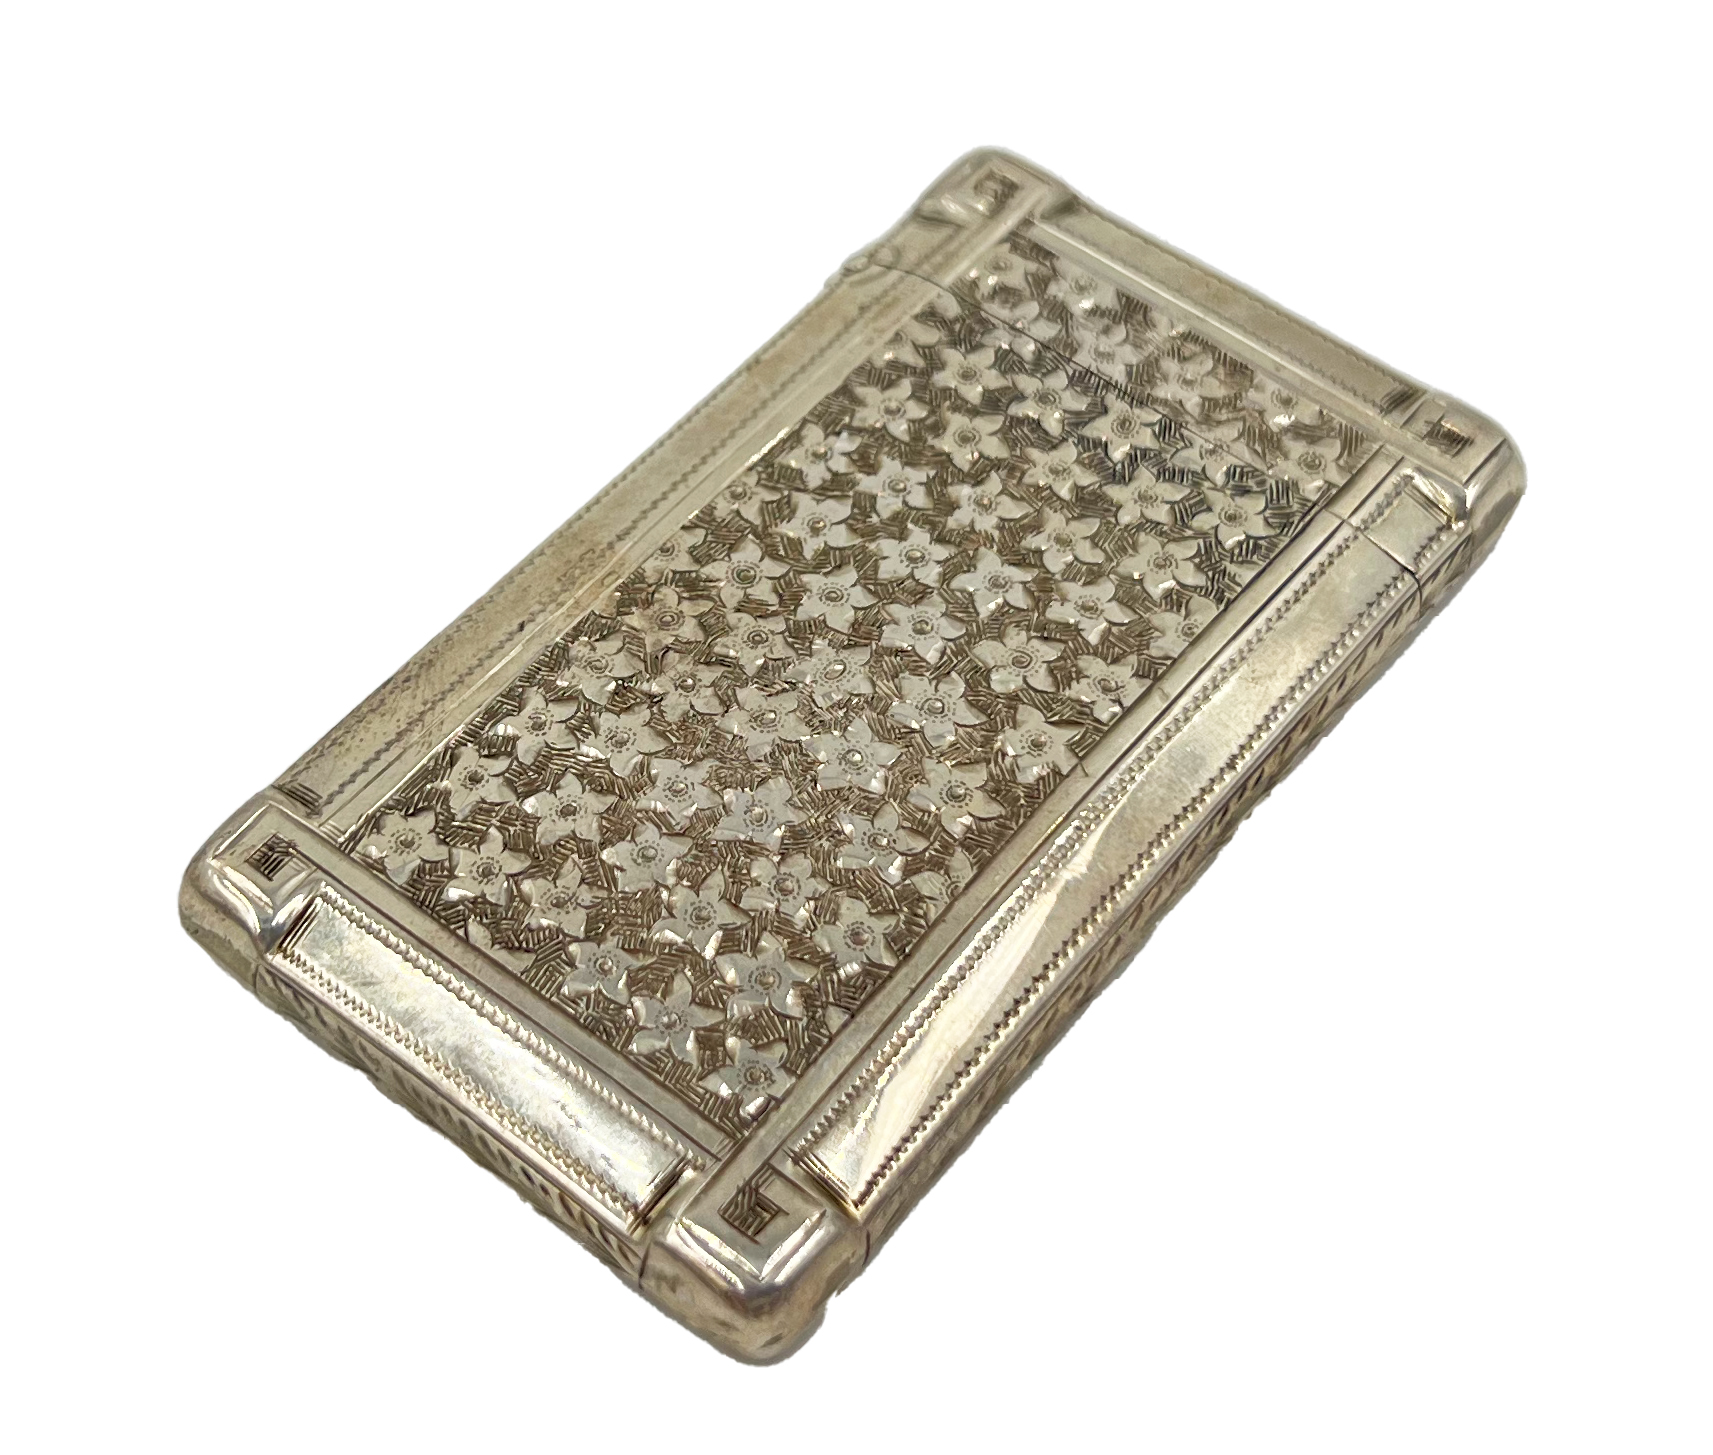 A SILVER CARD CASE WITH FLOWER DECORATION TO THE BODY, BIRMINGHAM, BY HILLIARD AND THOMASON, 1866 - Image 2 of 4